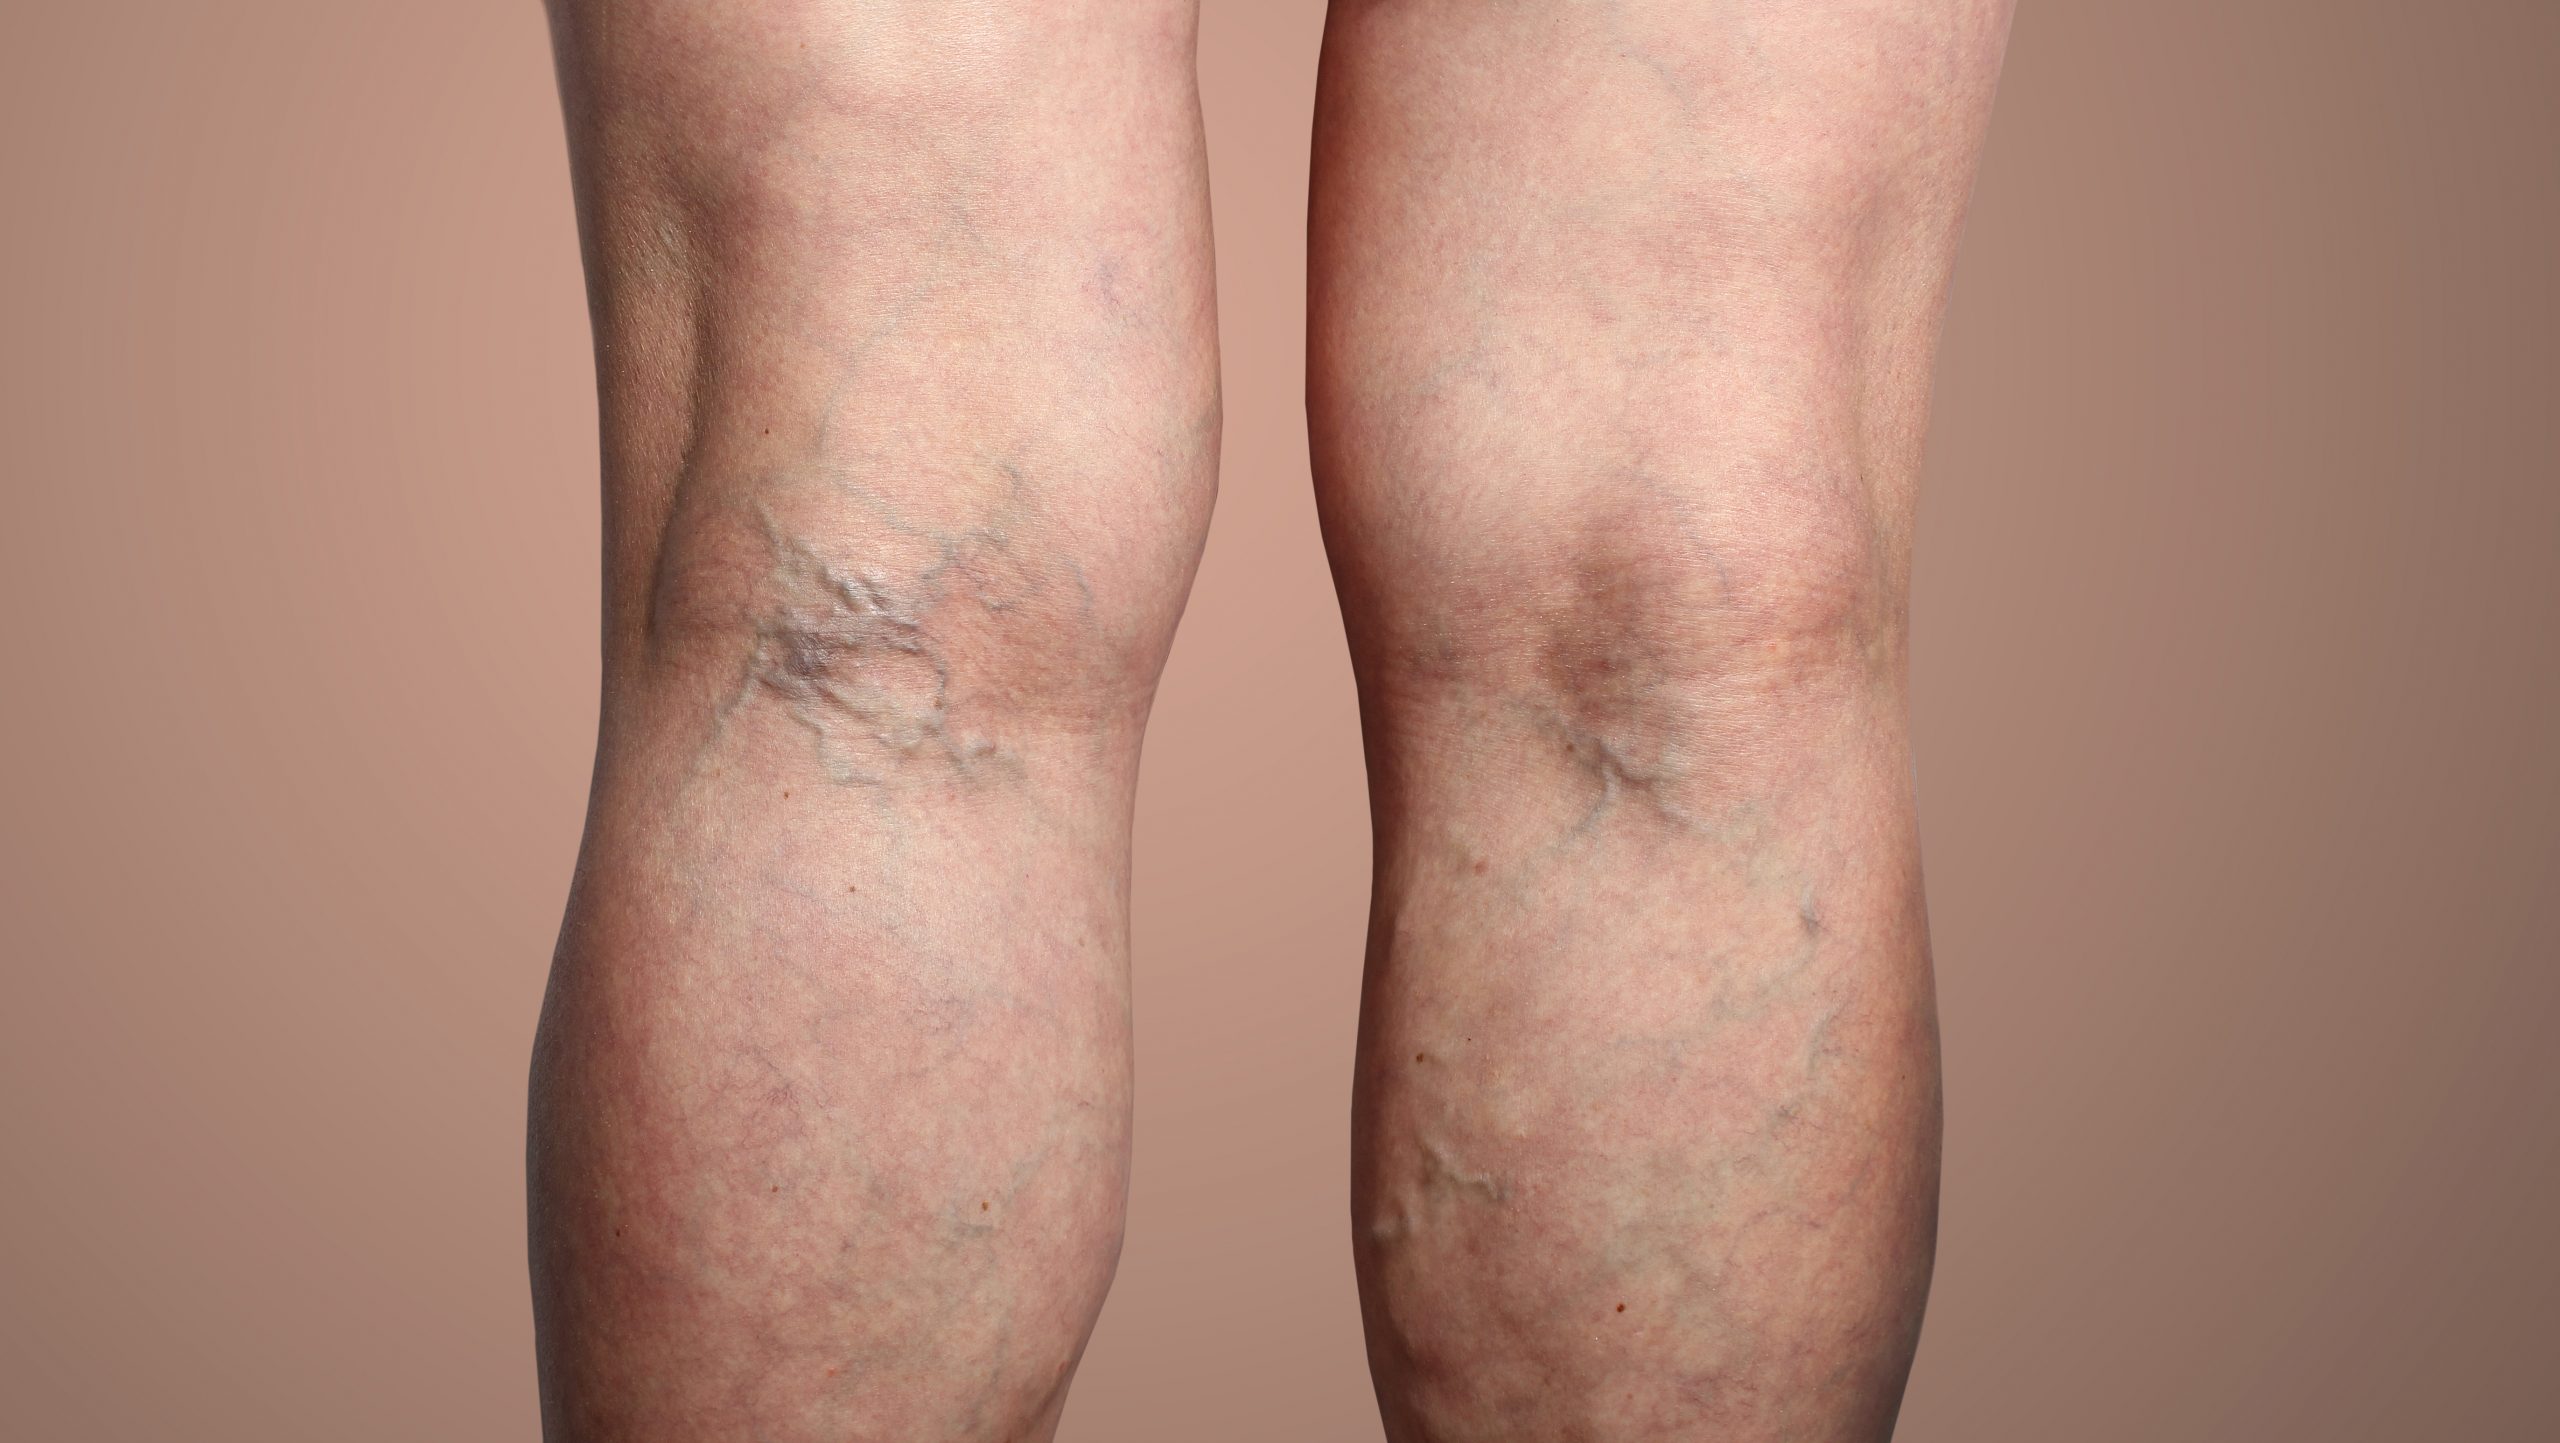 What is the best treatment to get rid of varicose veins? - Prolife